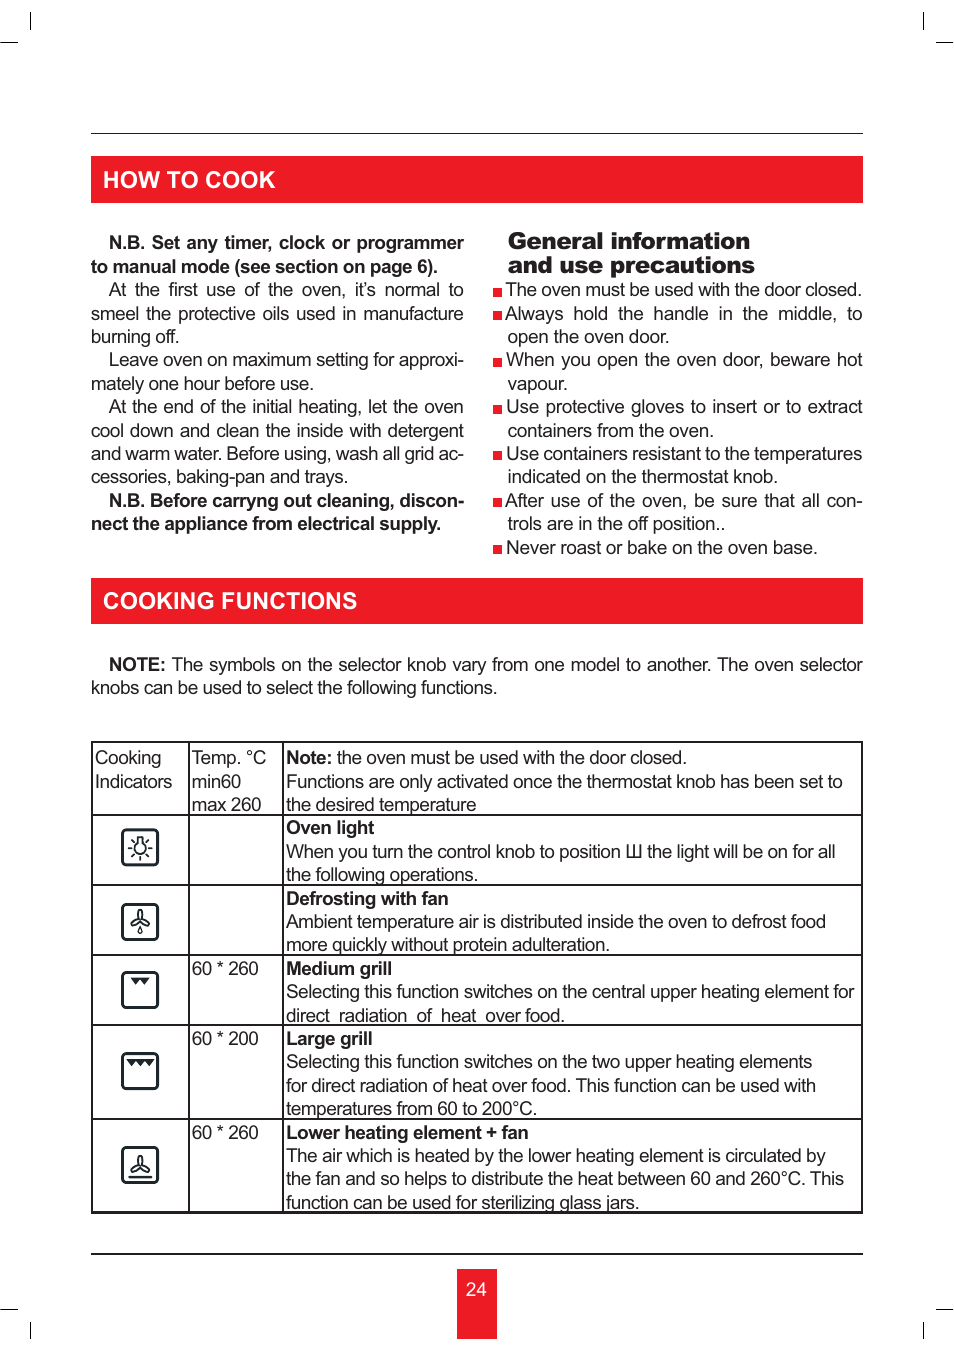 How to cook, General information and use precautions, Cooking functions | KORTING OKB481CRC User Manual | Page 24 / 36